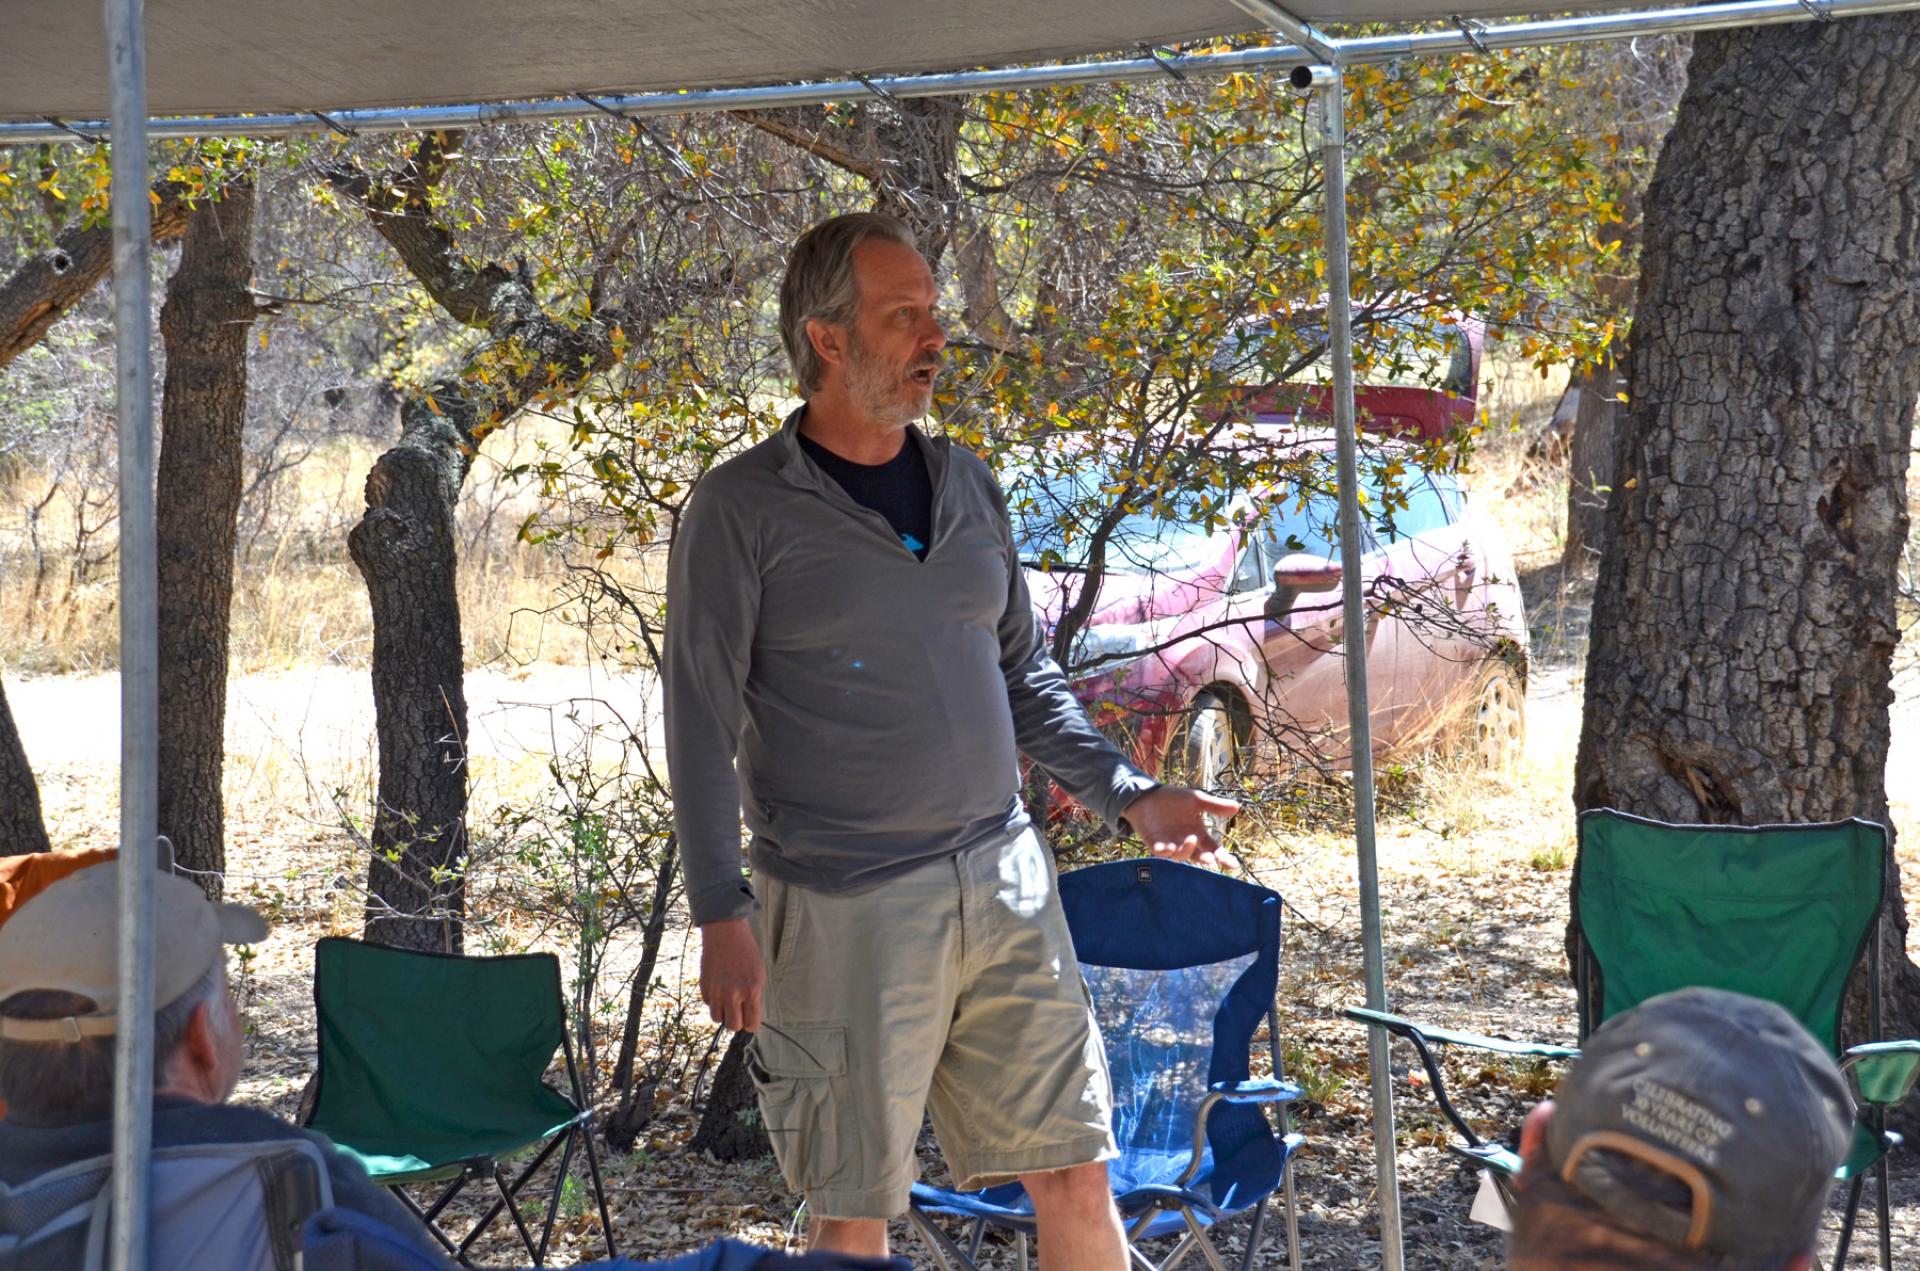 Man with gray beard standing and talking under canopy structure